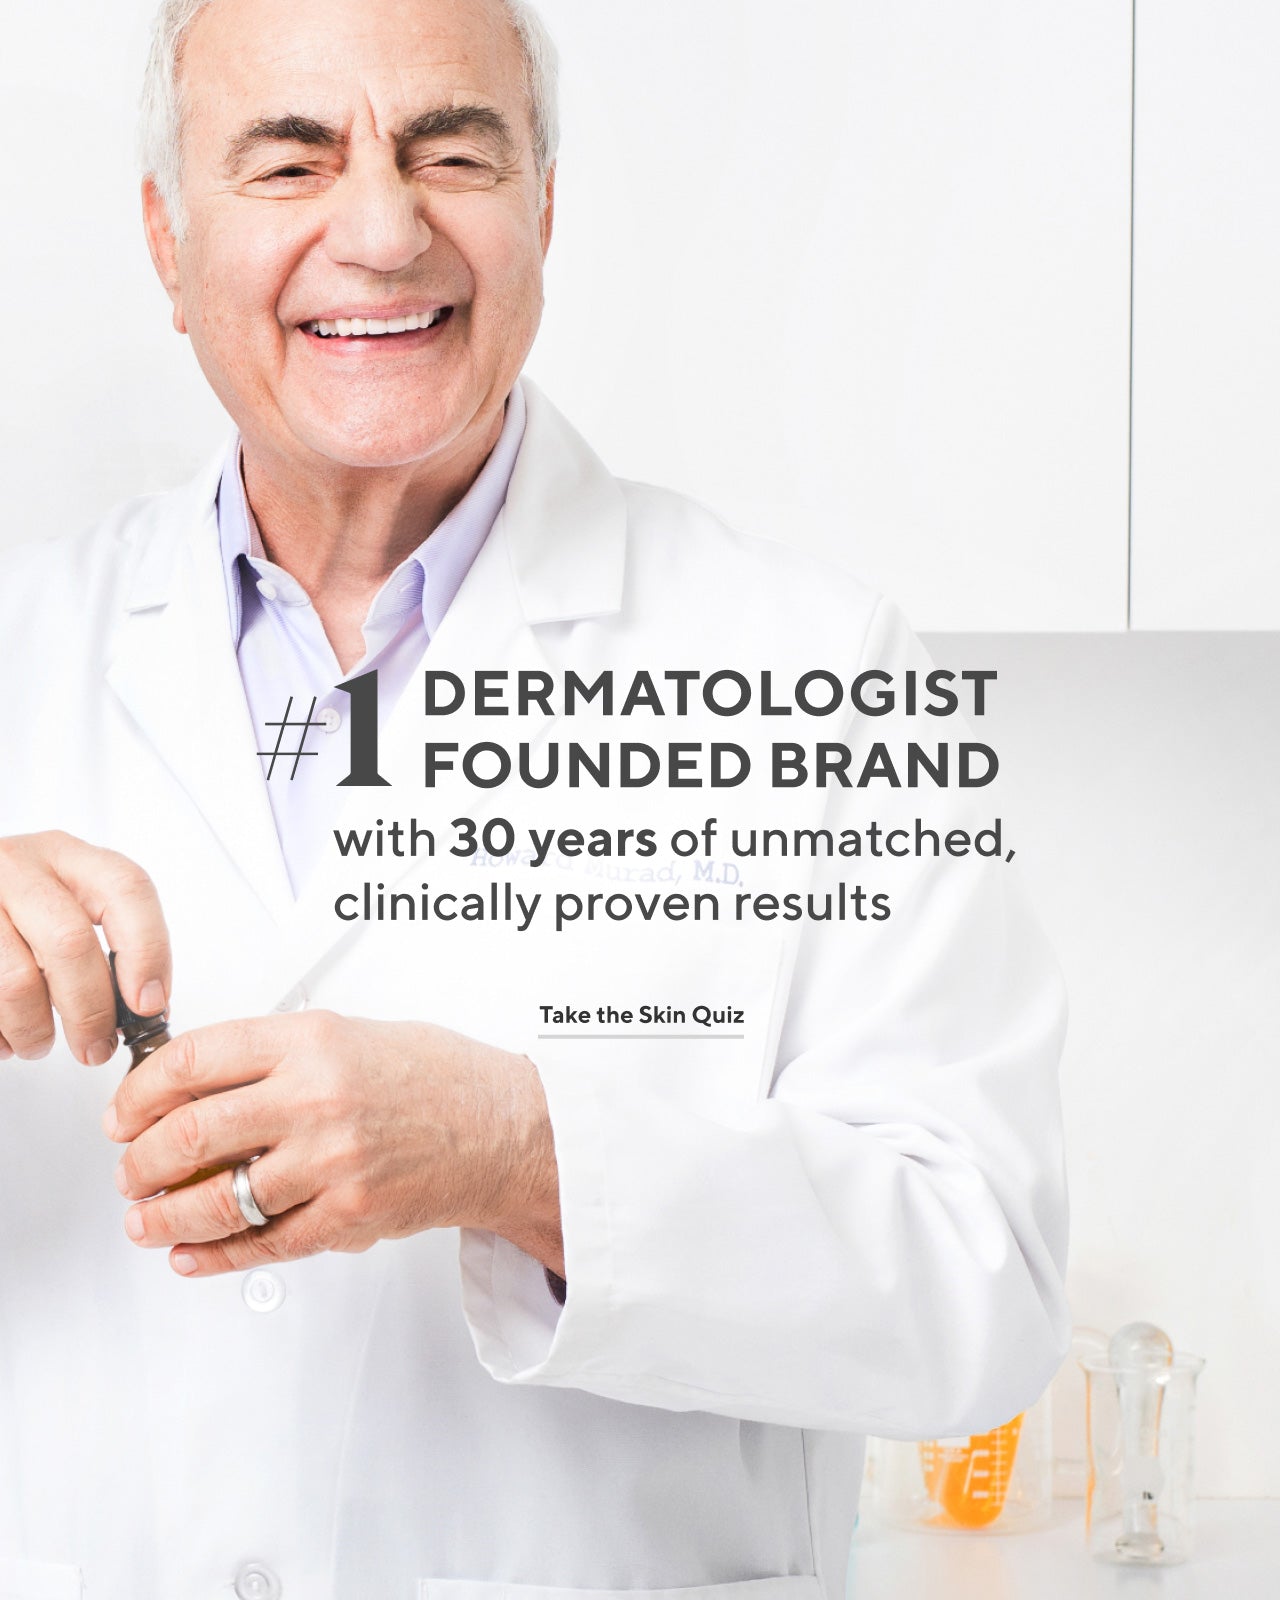 #1 dermatologist founded brand with 30 years of clinically proven results. Take the Skin Quiz now.